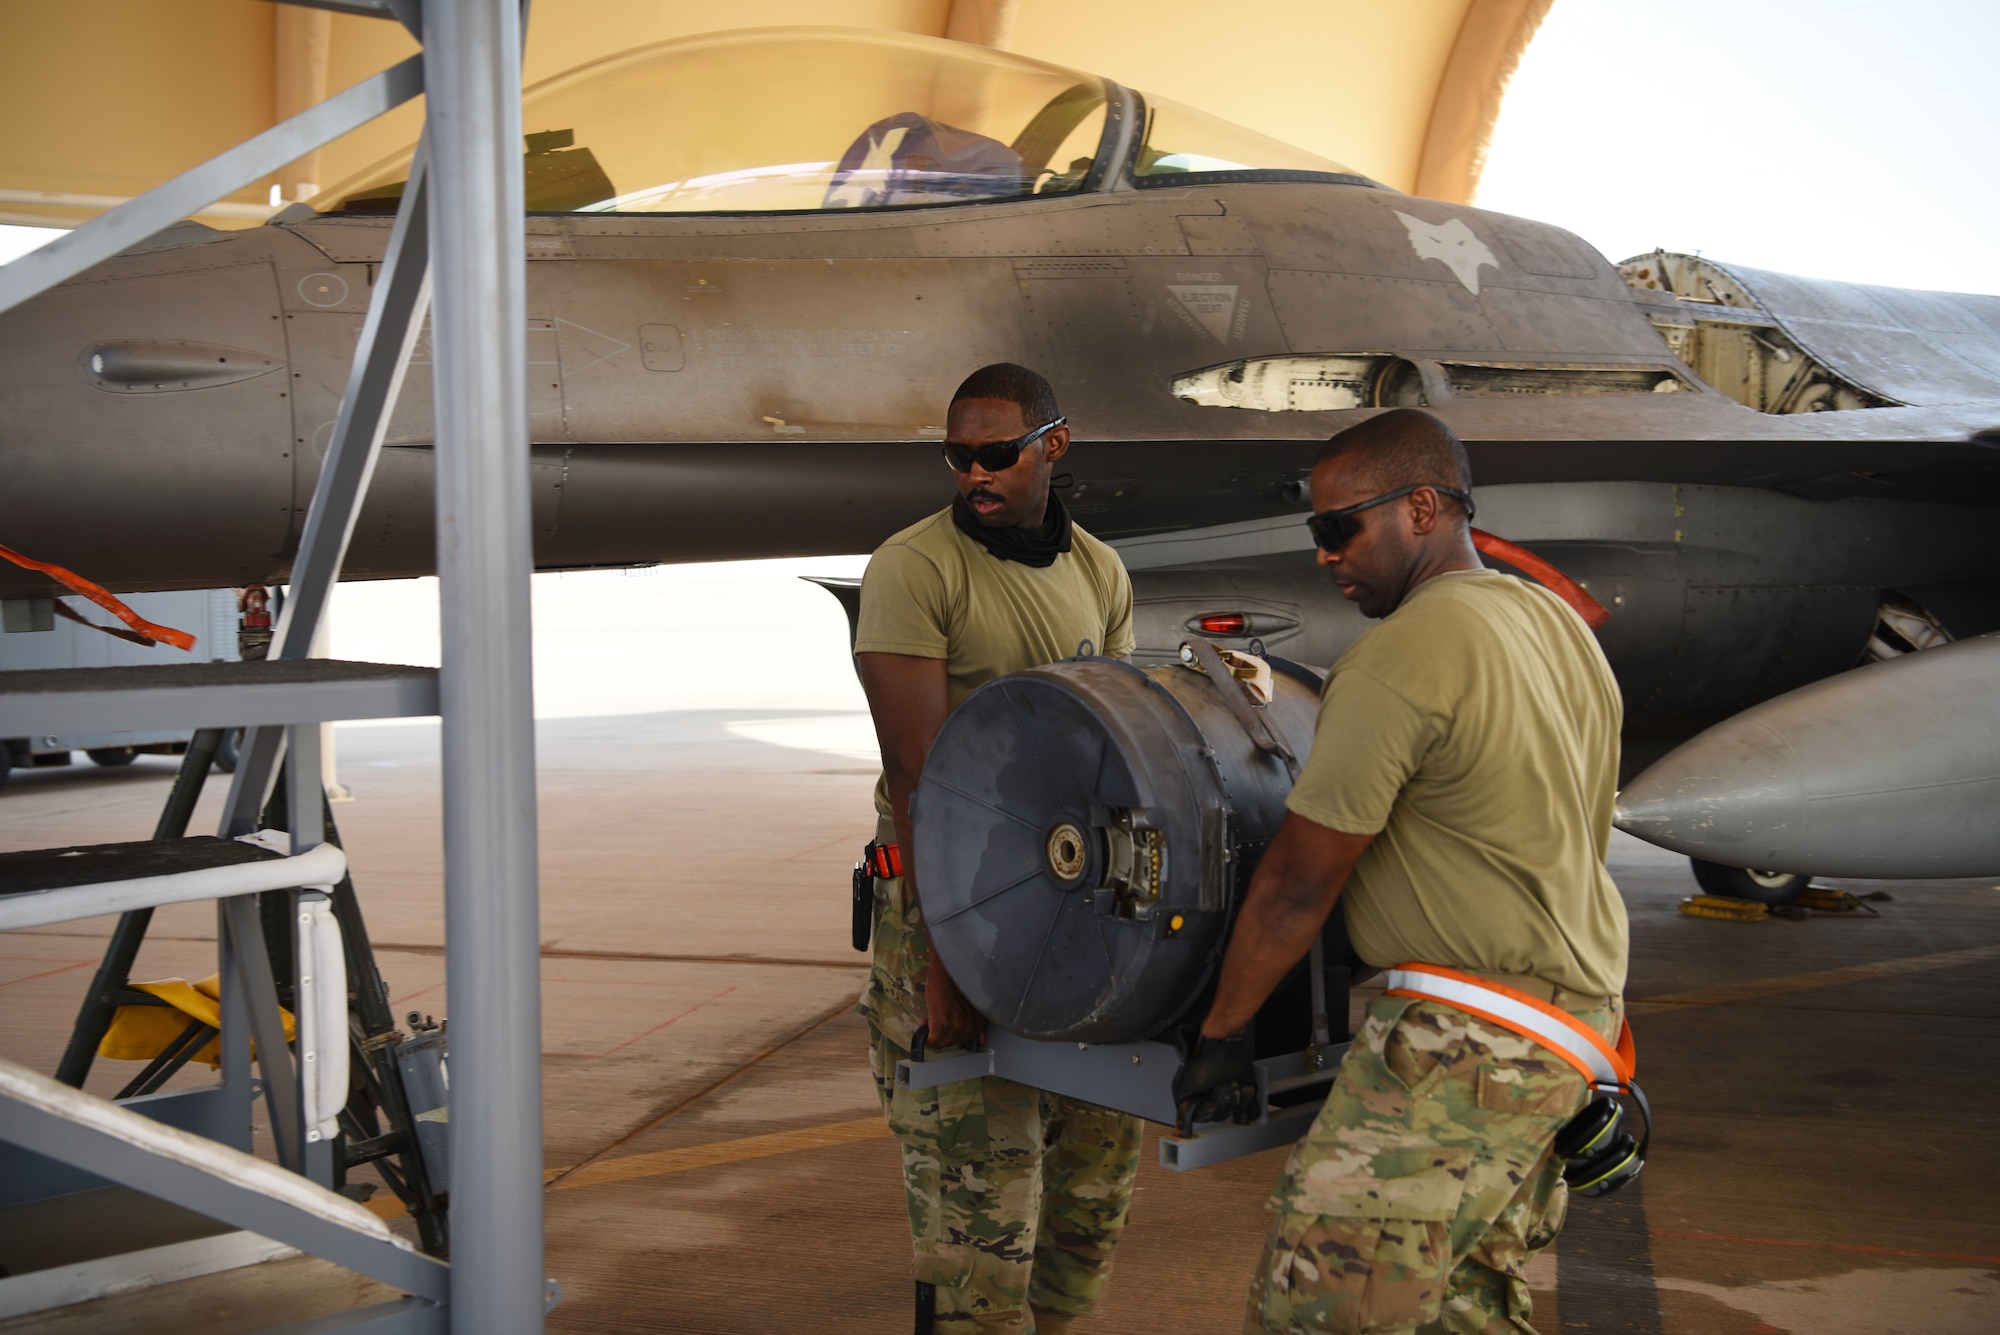 U.S. Air Force Staff Sgt. Kajuan Archer (left) and U.S. Air Force Staff Sgt. Rick Ingram, 378th Expeditionary Maintenance Squadron armament backshop personnel, remove parts of an M61A1 Vulcan cannon from an F-16 Fighting Falcon fighter jet at Prince Sultan Air Base, Kingdom of Saudi Arabia, June 8, 2021. The "Swamp Fox" Airmen from the South Carolina Air National Guard are deployed to PSAB to project combat power and help bolster defensive capabilities against potential threats in the region. (U.S. Air National Guard photo by Senior Master Sgt. Carl Clegg)